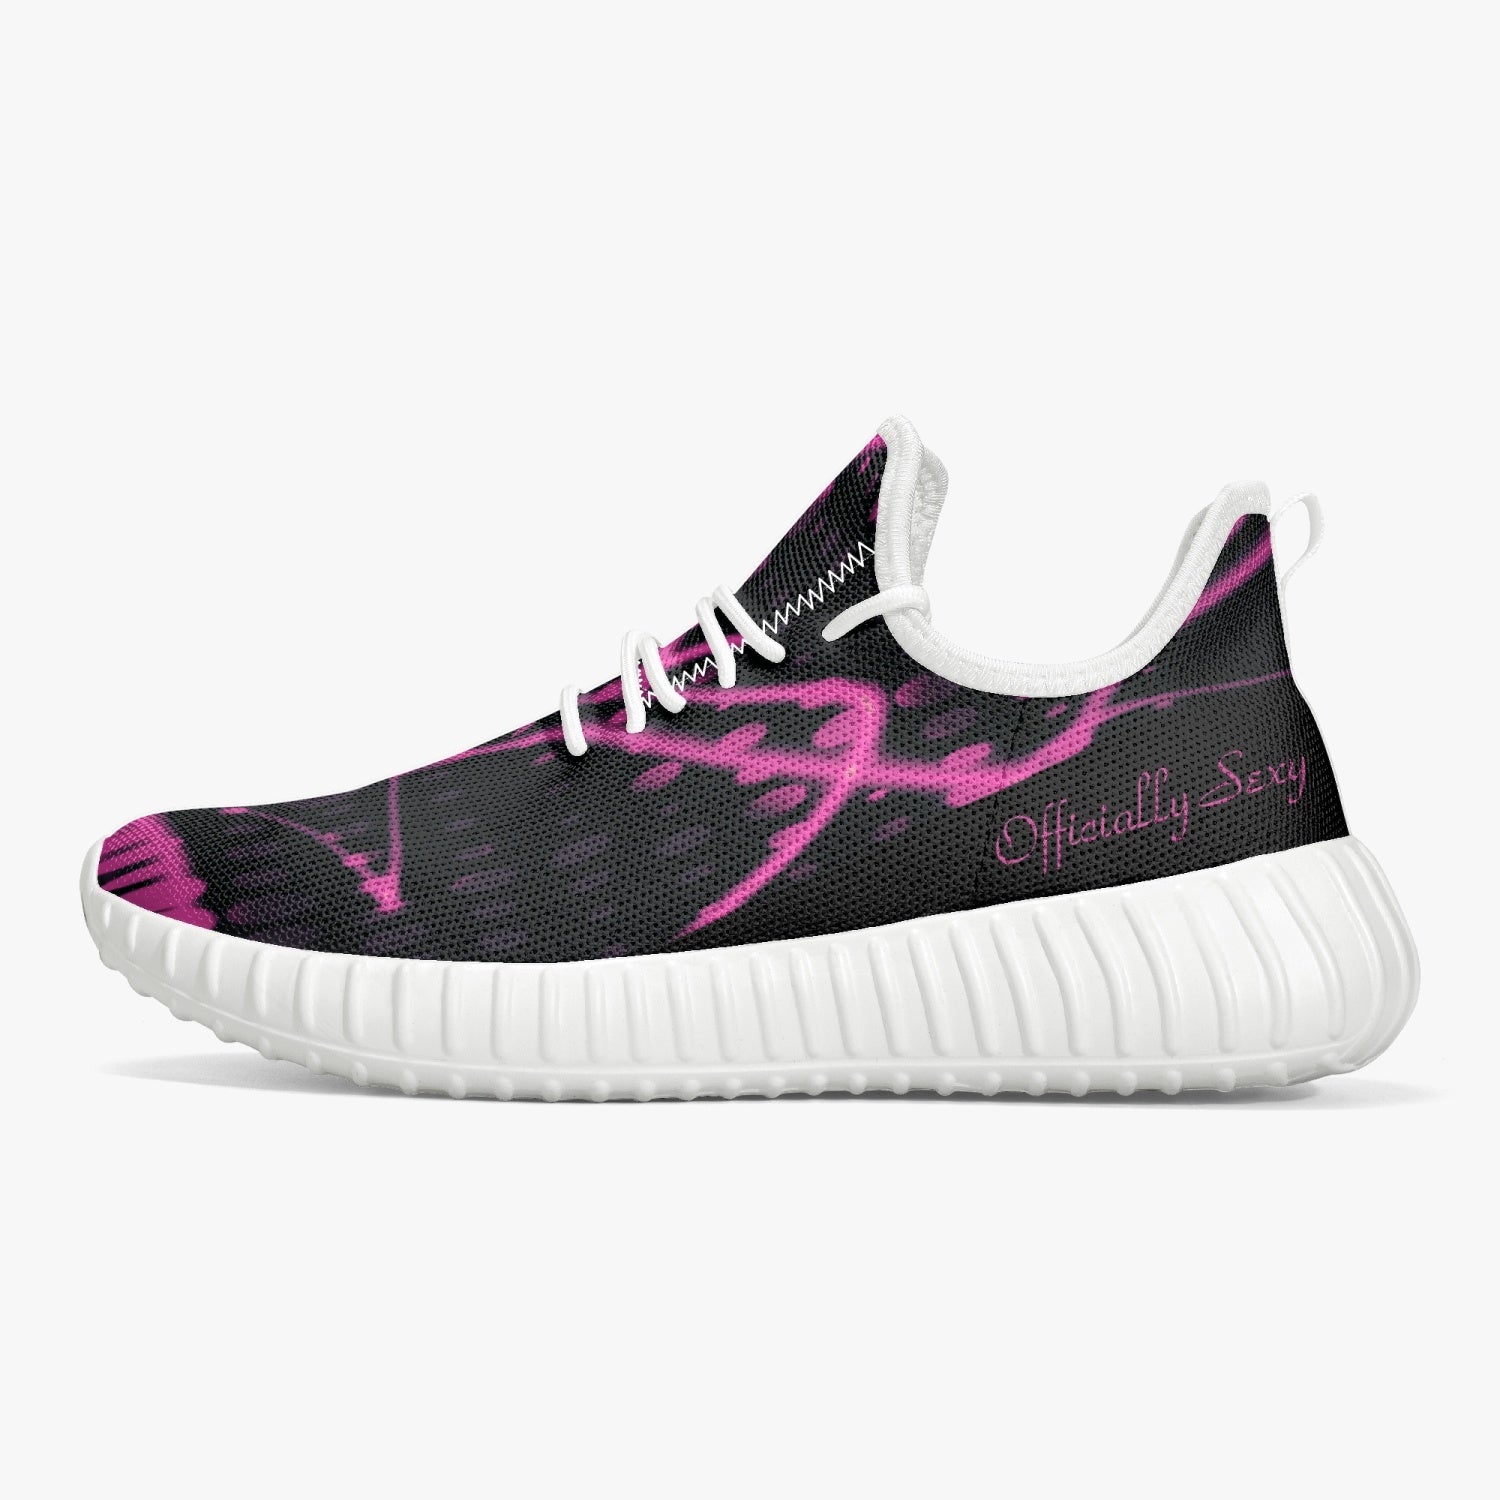 Officially Sexy Pink & Black Laser Print Mesh Knit Sneakers - With White or Black Sole